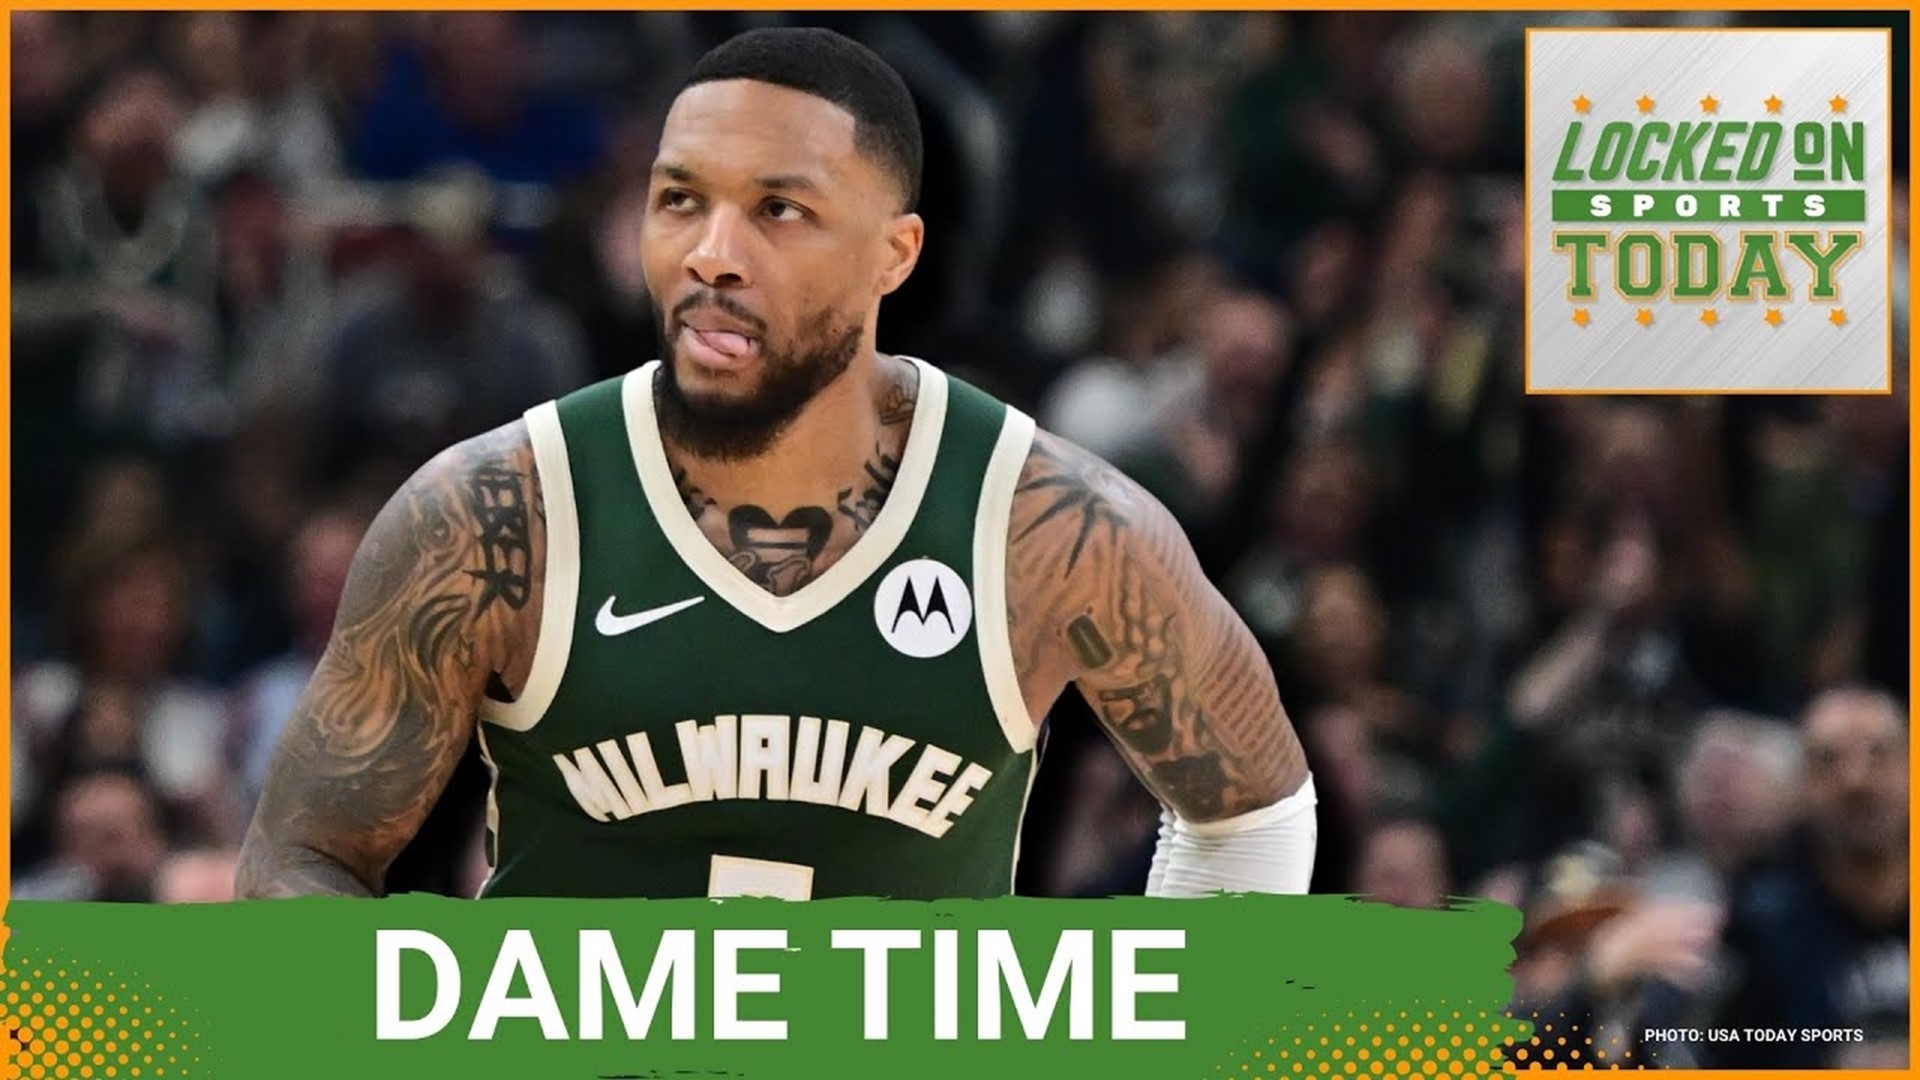 The Milwaukee Bucks defeated the Indiana Pacers in the first round of the NBA Playoffs thanks to a massive first half from Damian Lillard.